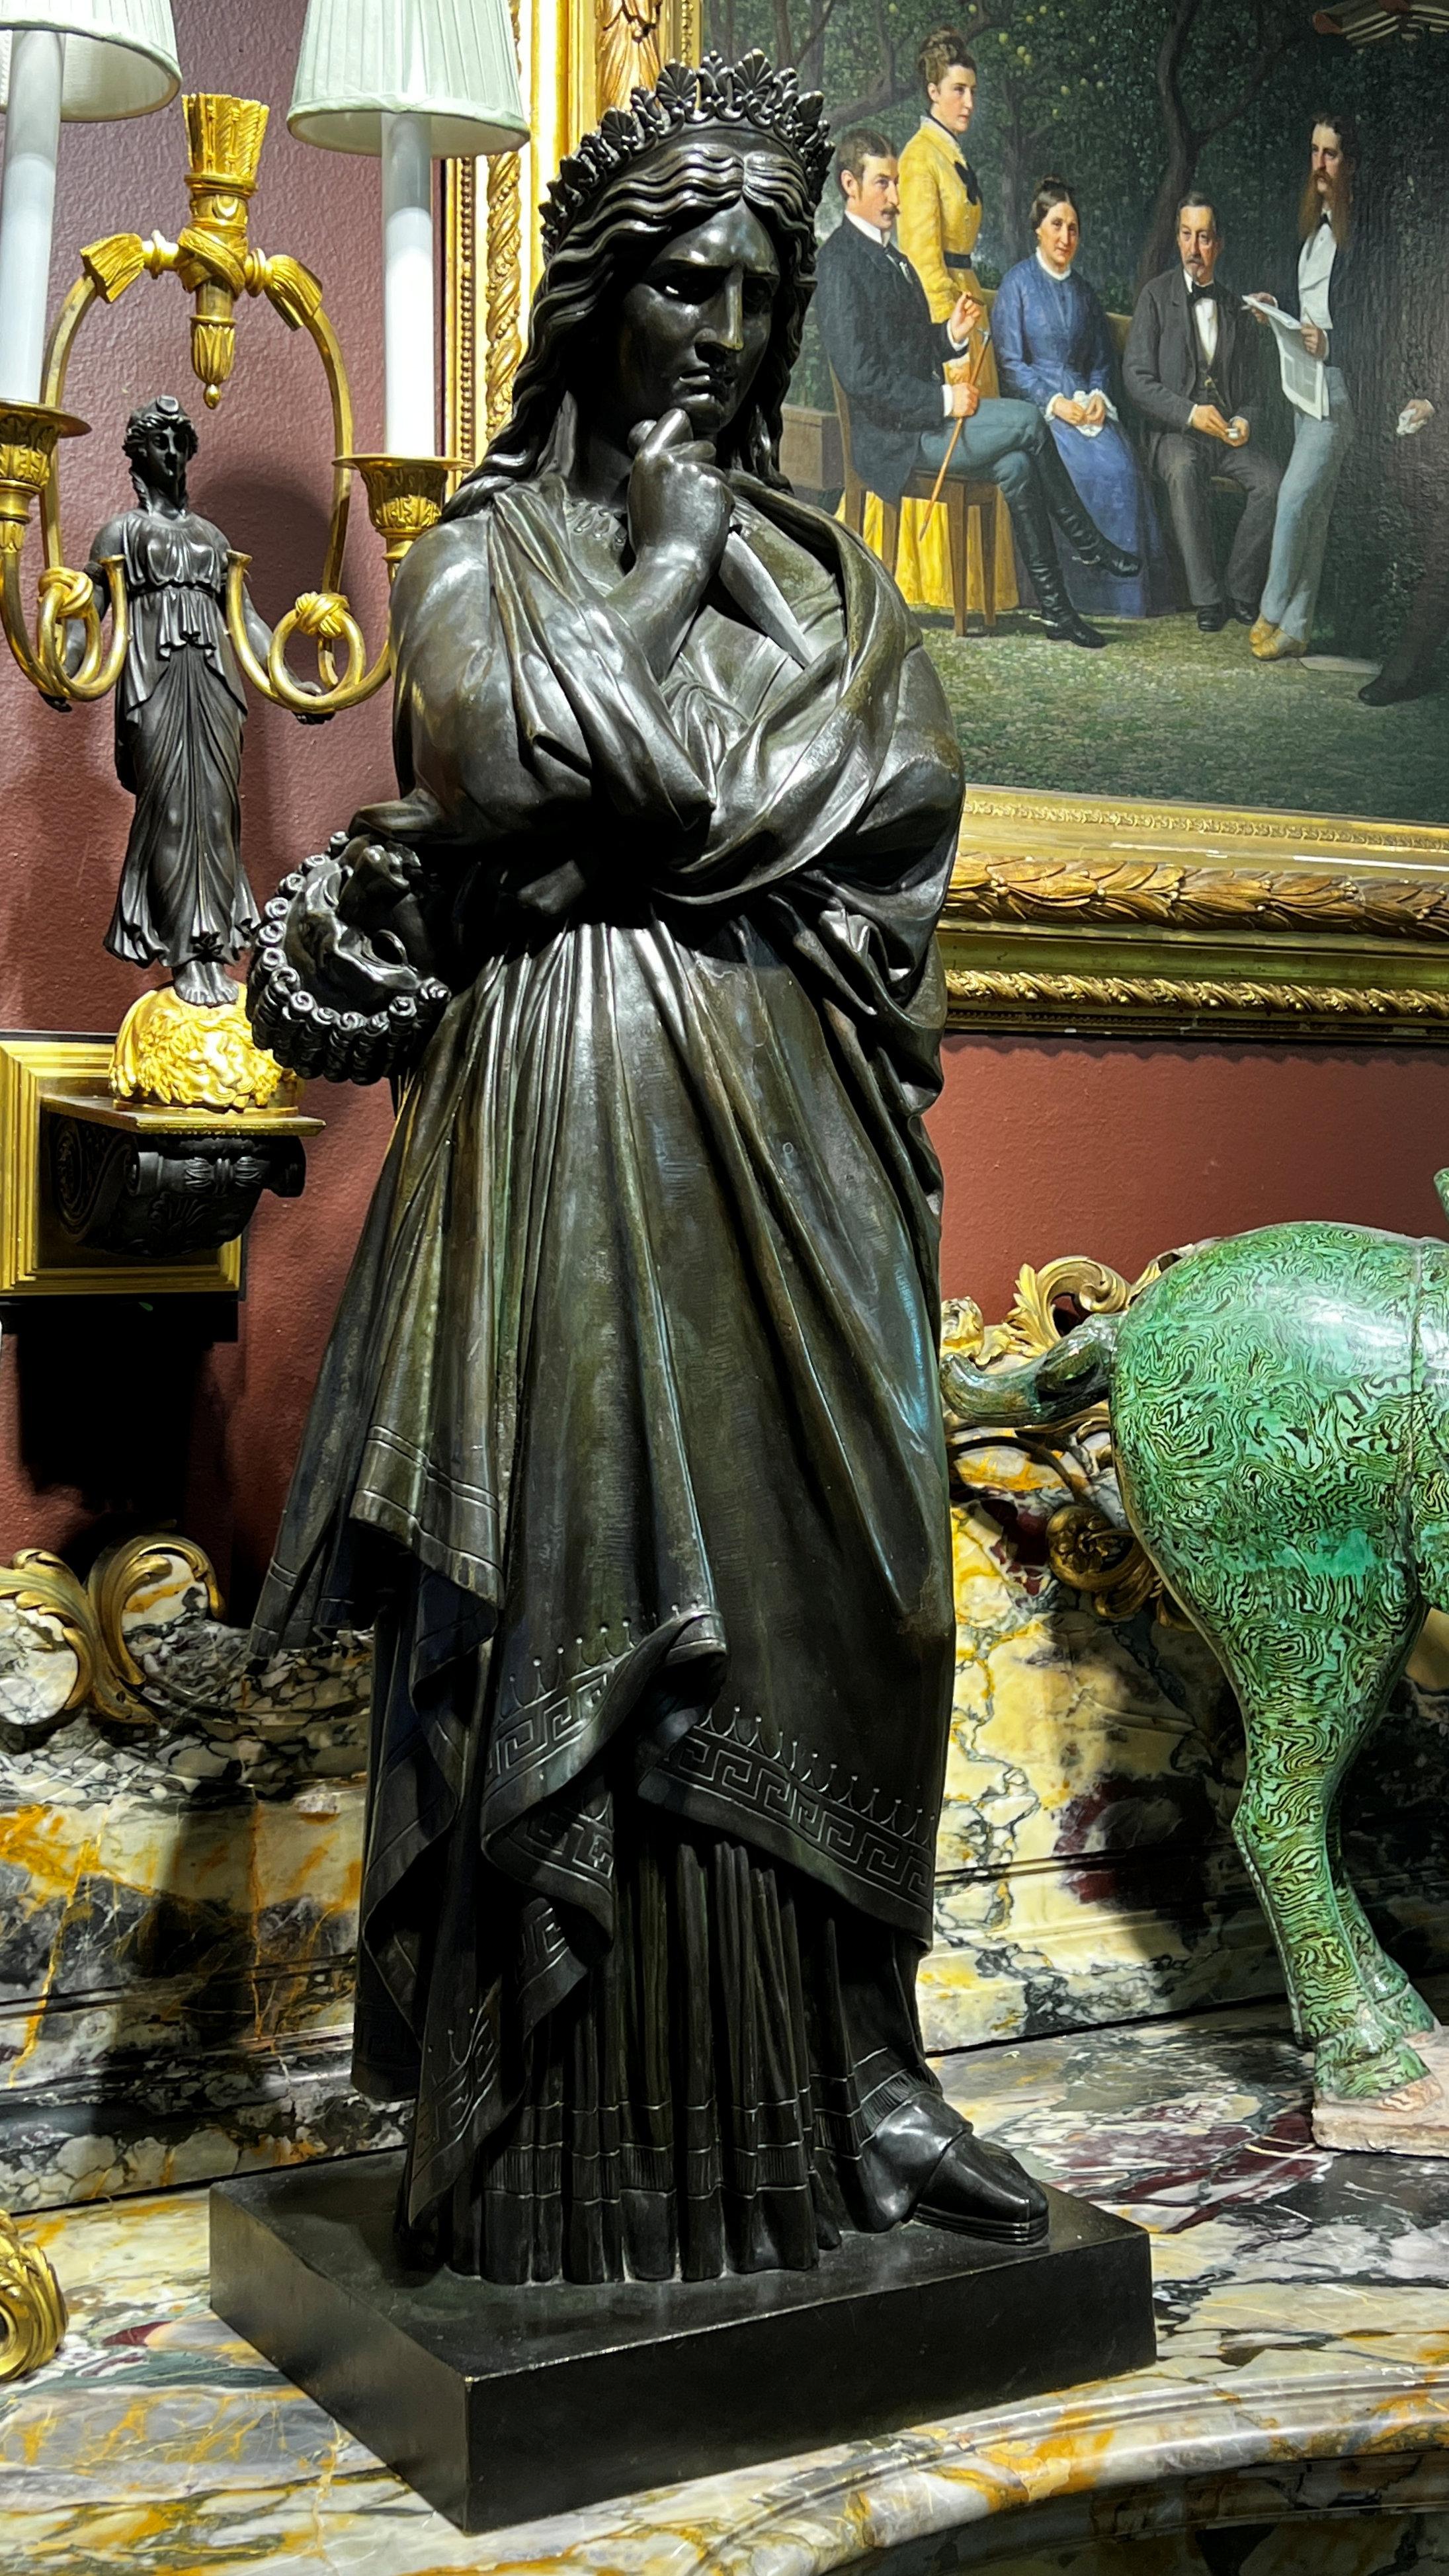 Our patinated bronze, La Tragédie, after the French sculptor, Francisque Duret (1804-1865) measures 37.5 in (95 cm) and is in good condition, with a warm green-tinted brown patina.

Originally sculpted in marble, La Tragédie and La Comédie were